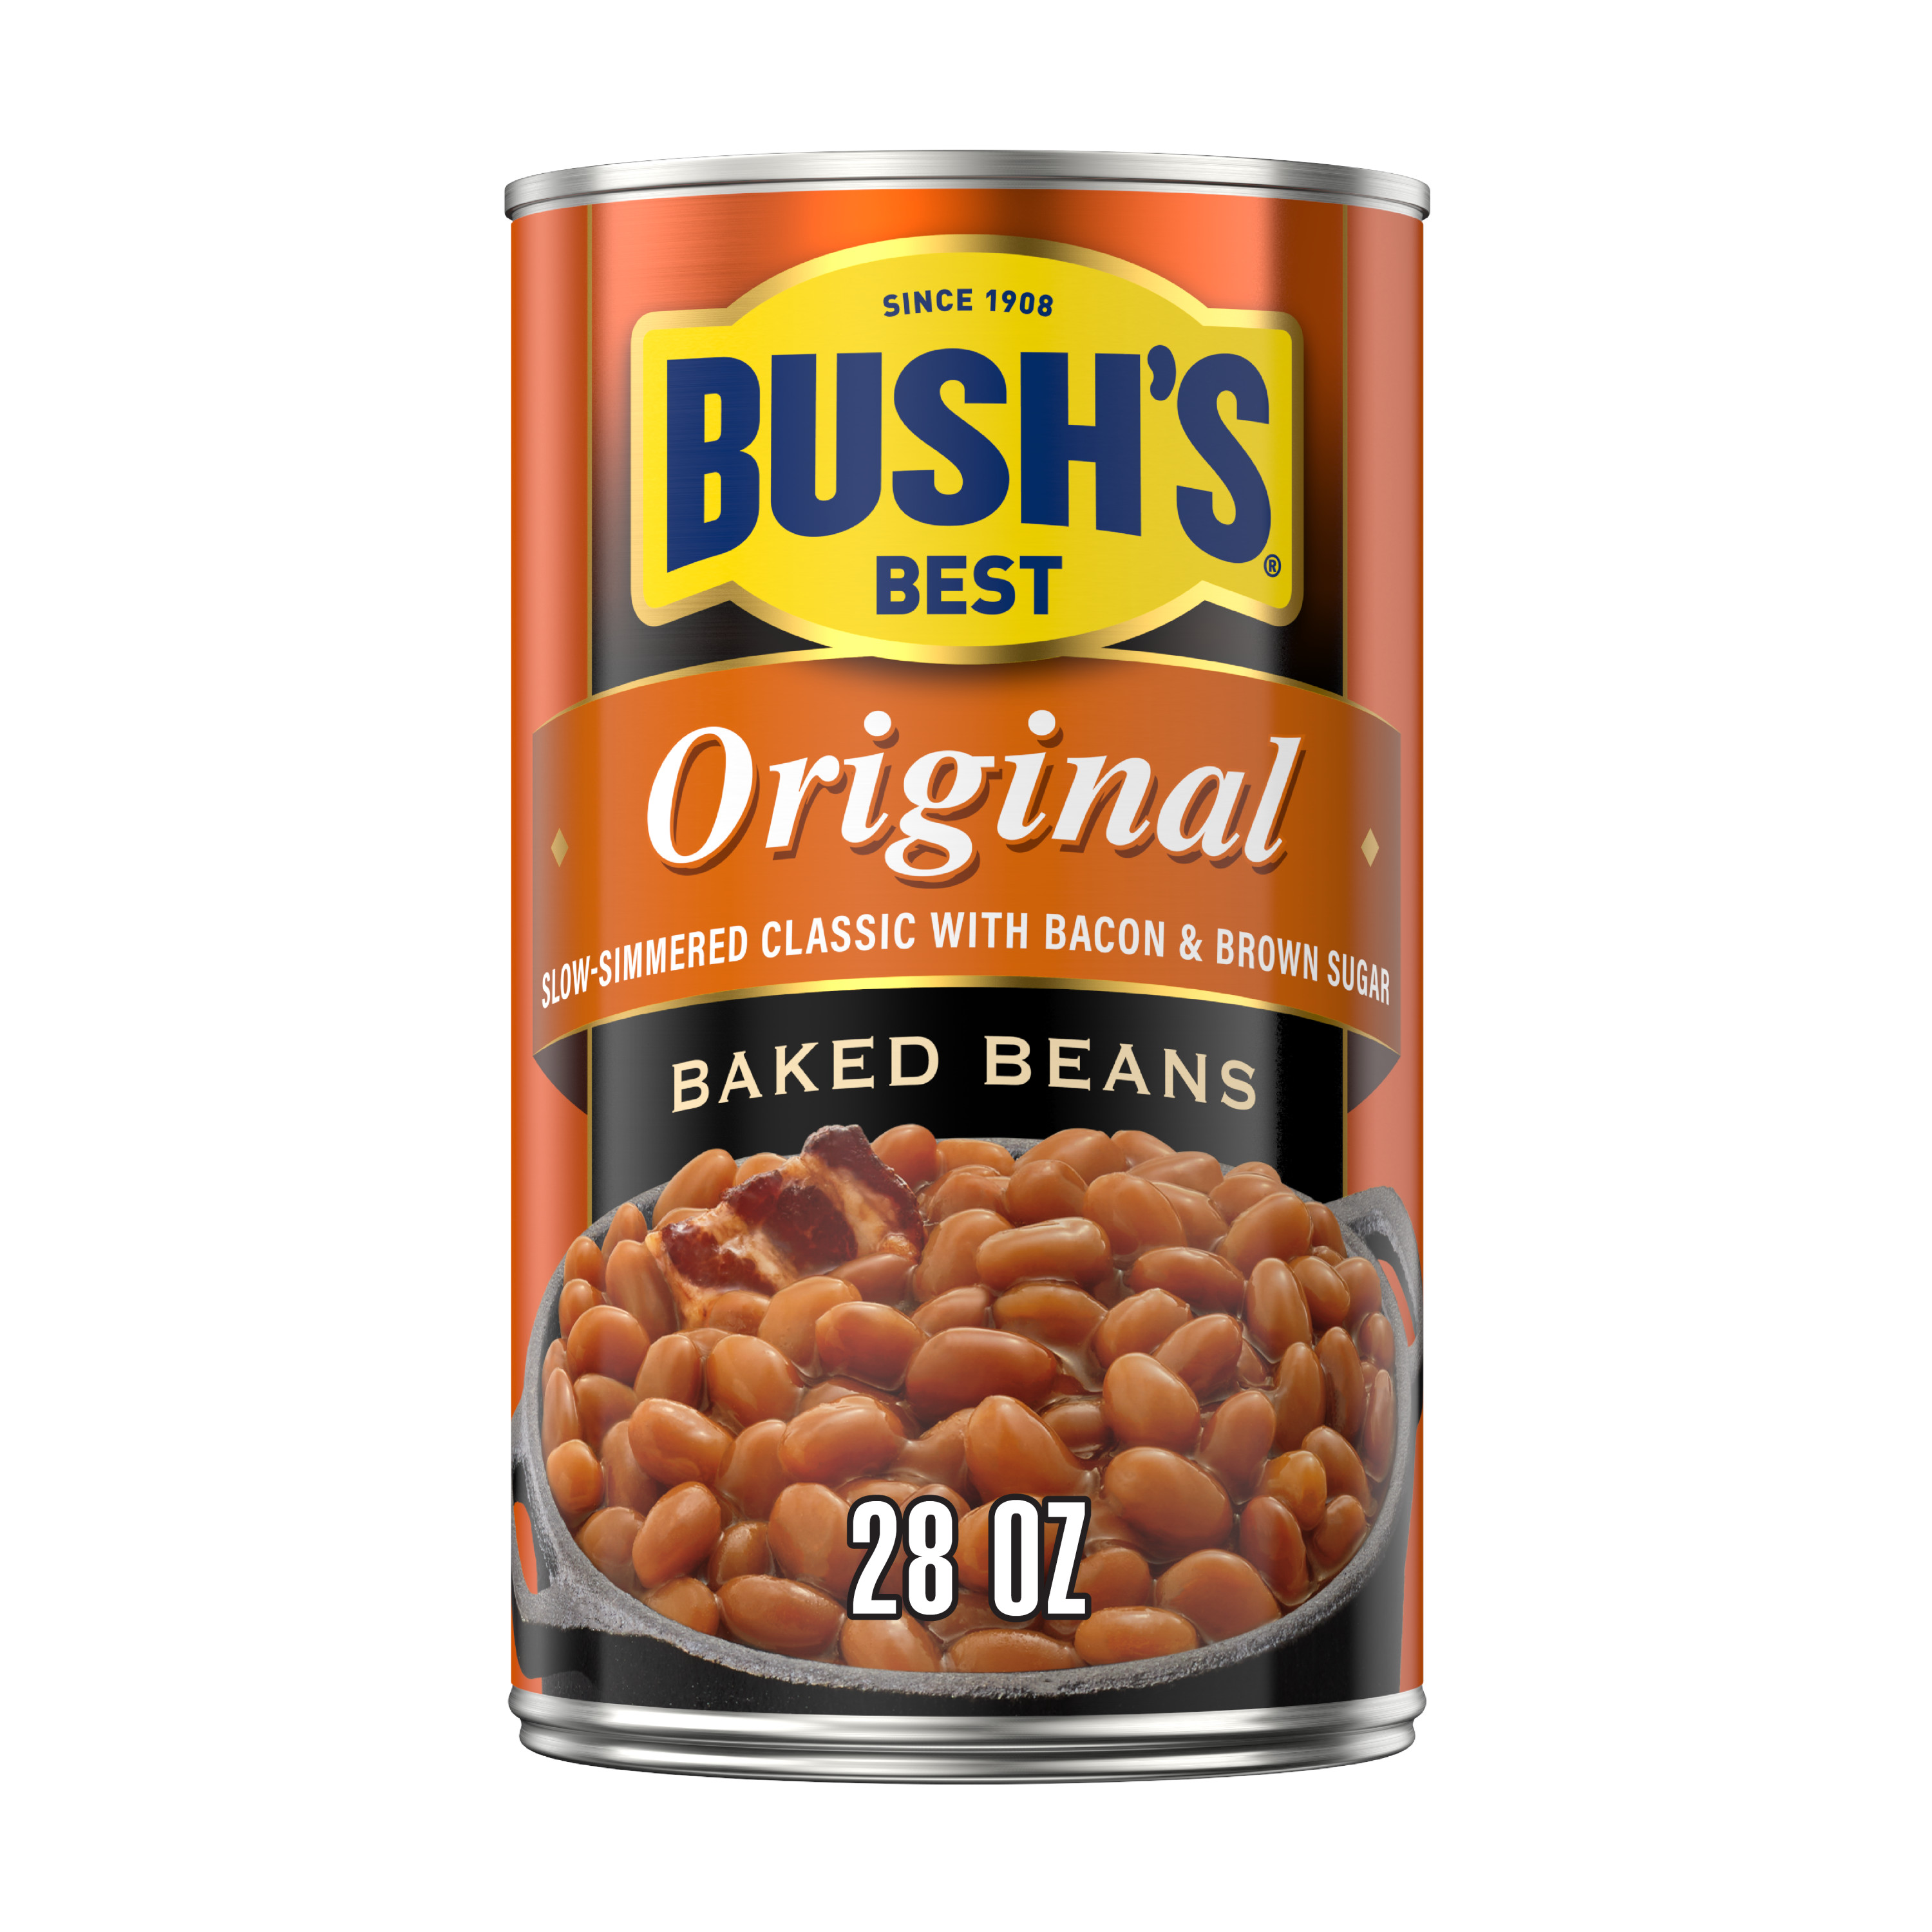 Bush's Original Baked Beans, Canned Beans, 28 oz Can - image 1 of 7